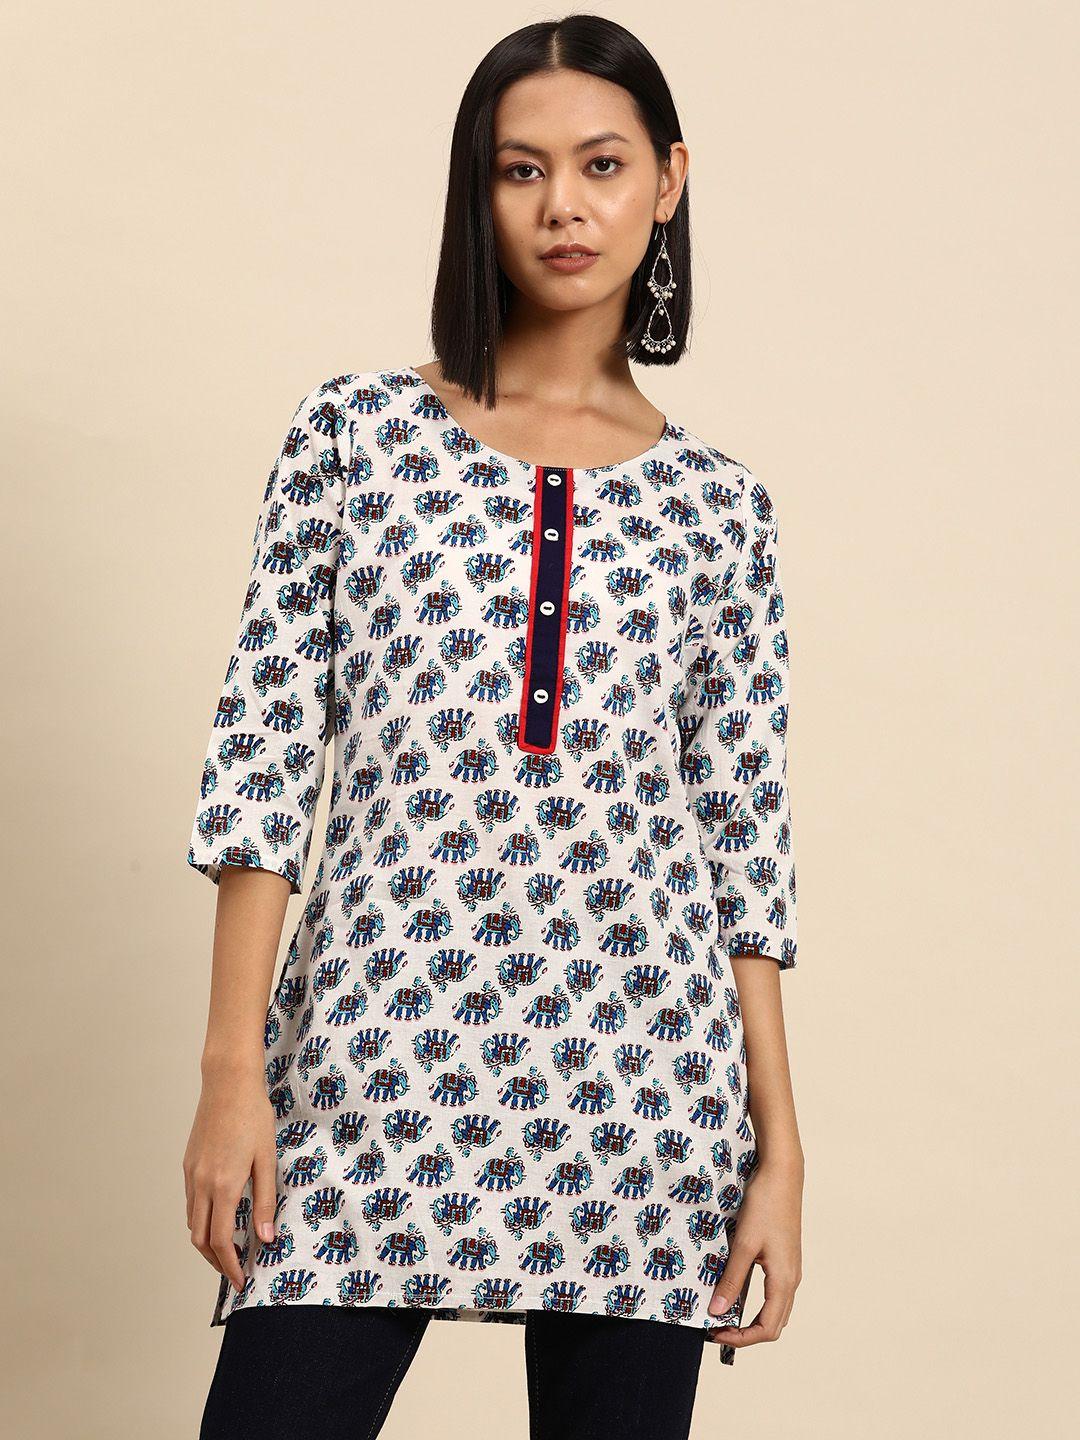 all about you tribal printed pure cotton kurti